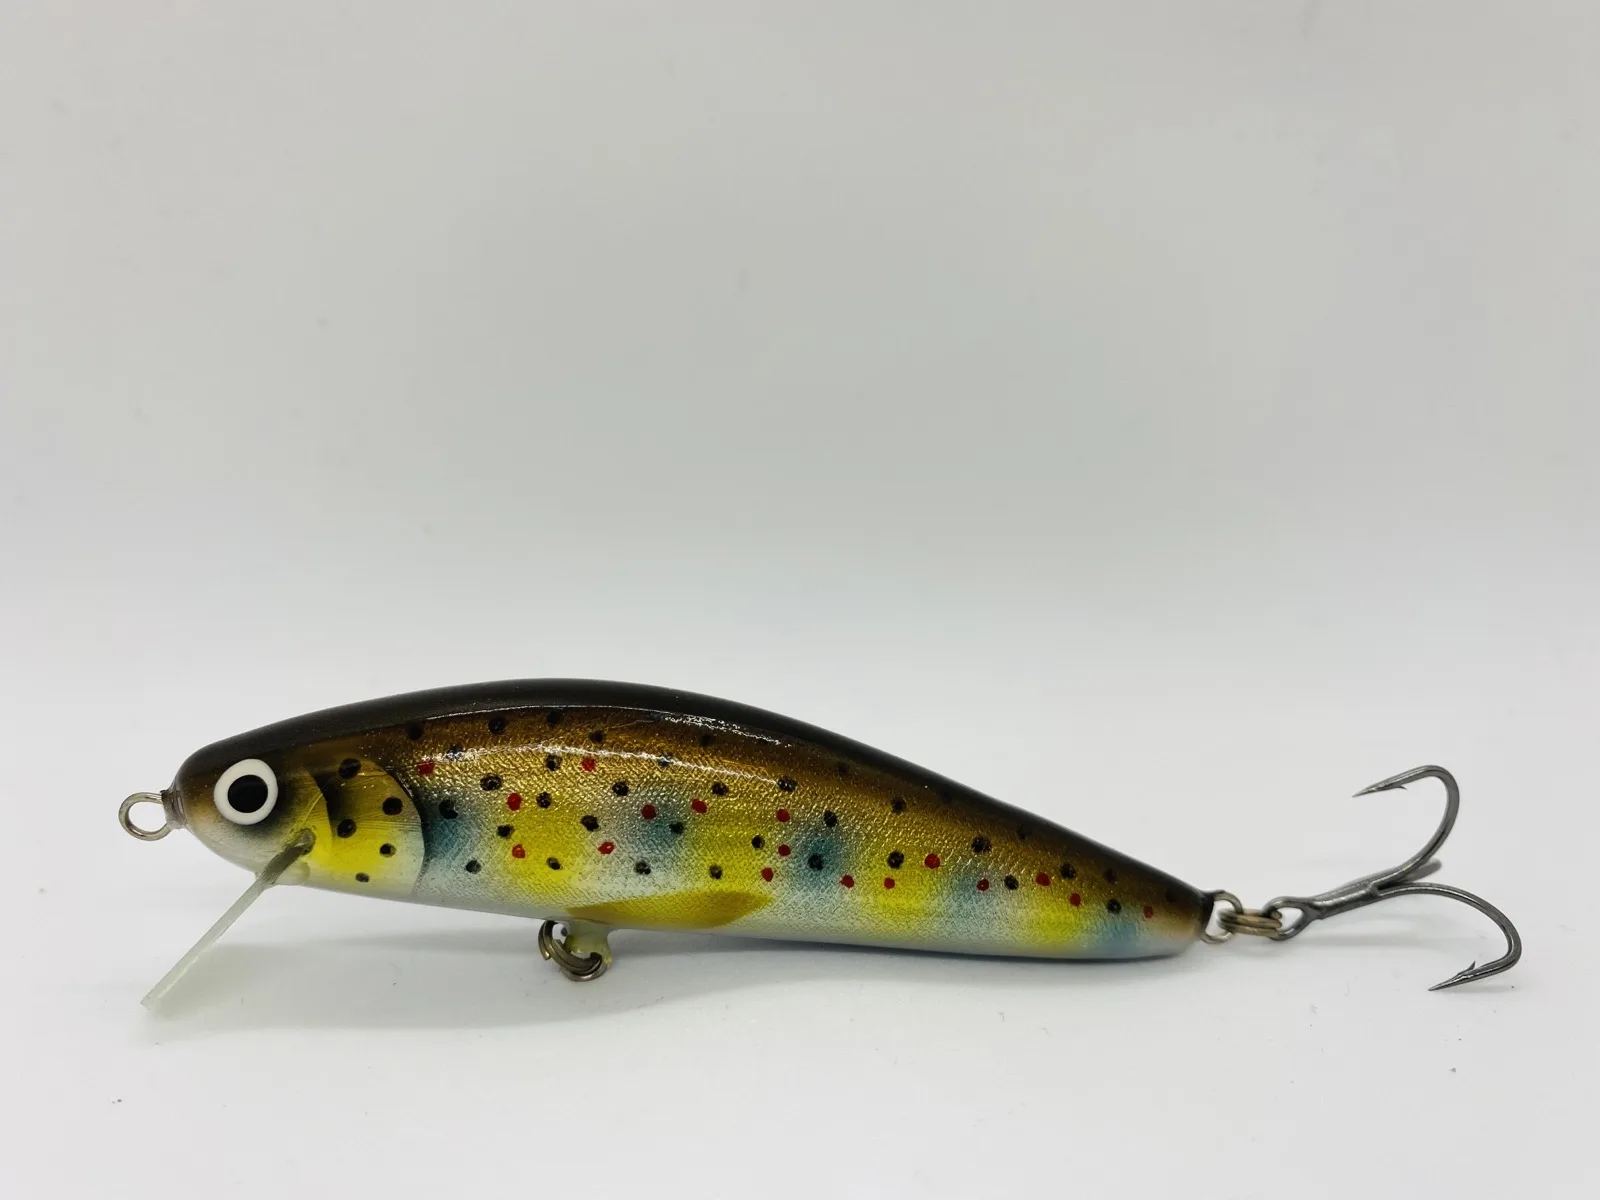 M Contact – Brown Trout “The Bull Trout Magnet” 9cm – CST Handmade Lures